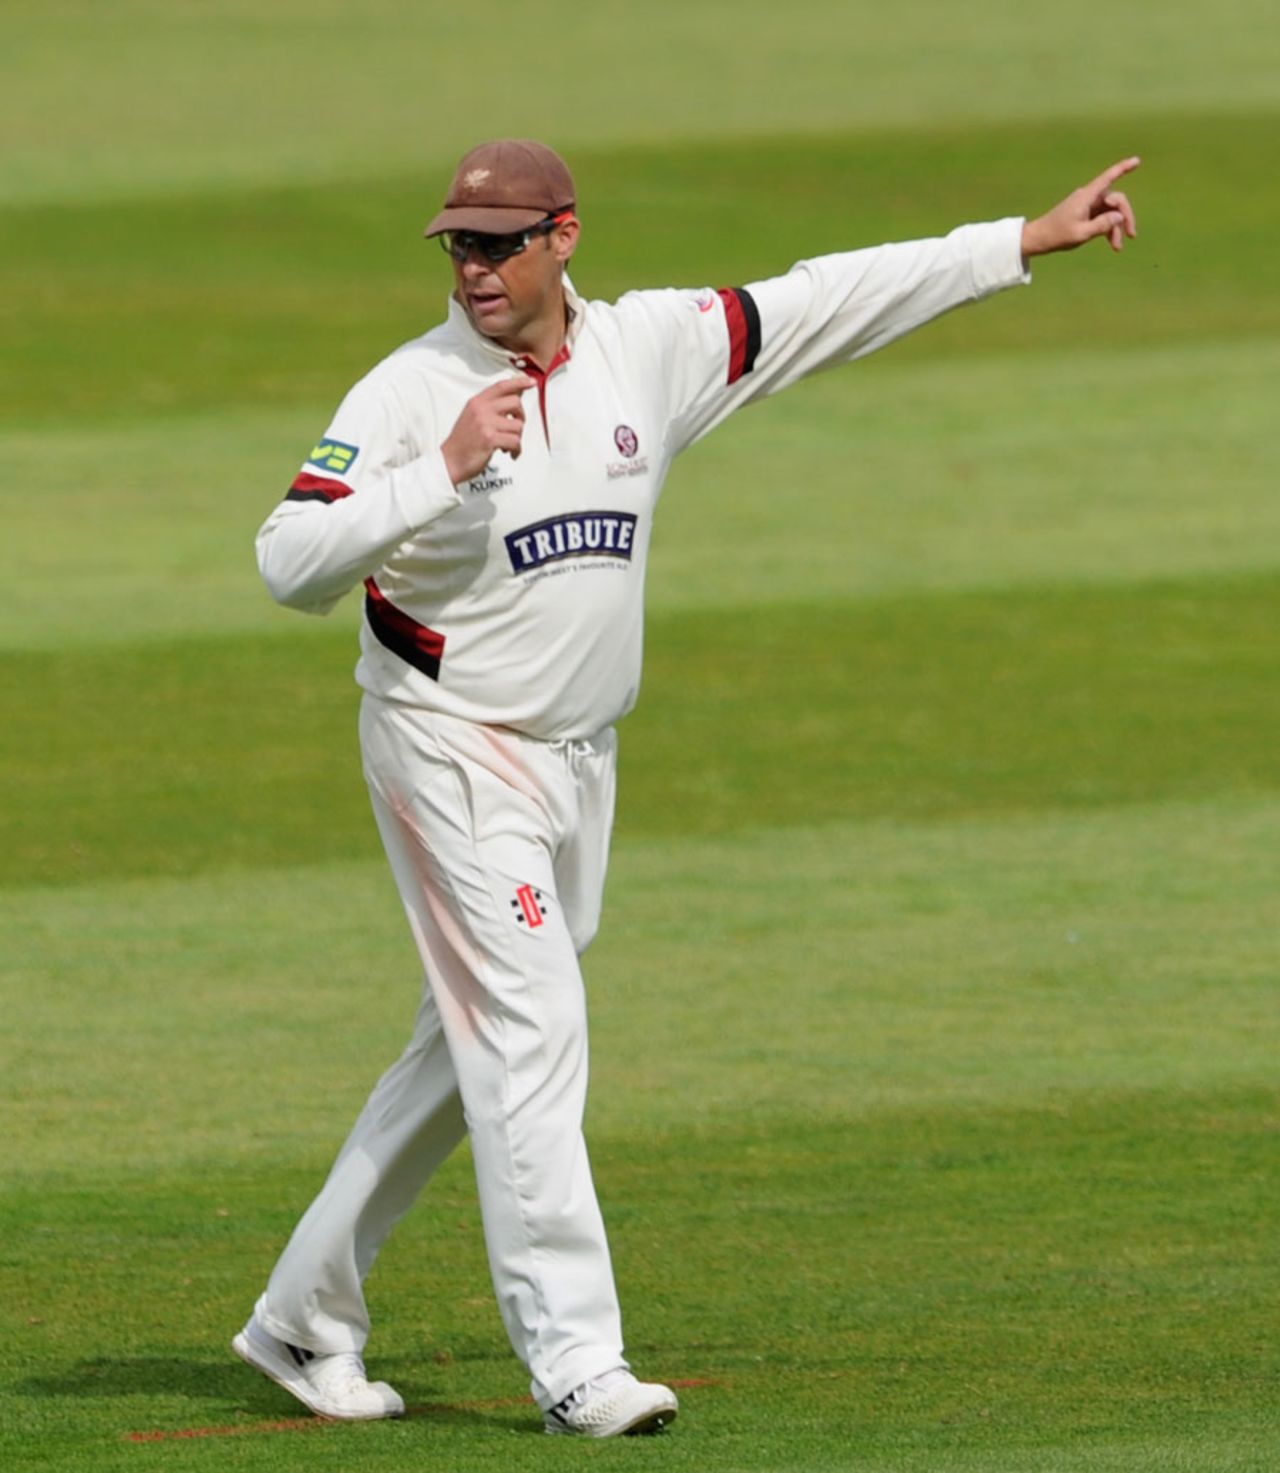 Marcus Trescothick directs on the field, Hampshire v Somerset, County Championship, Division One, Taunton, 1st day, September 9, 2015